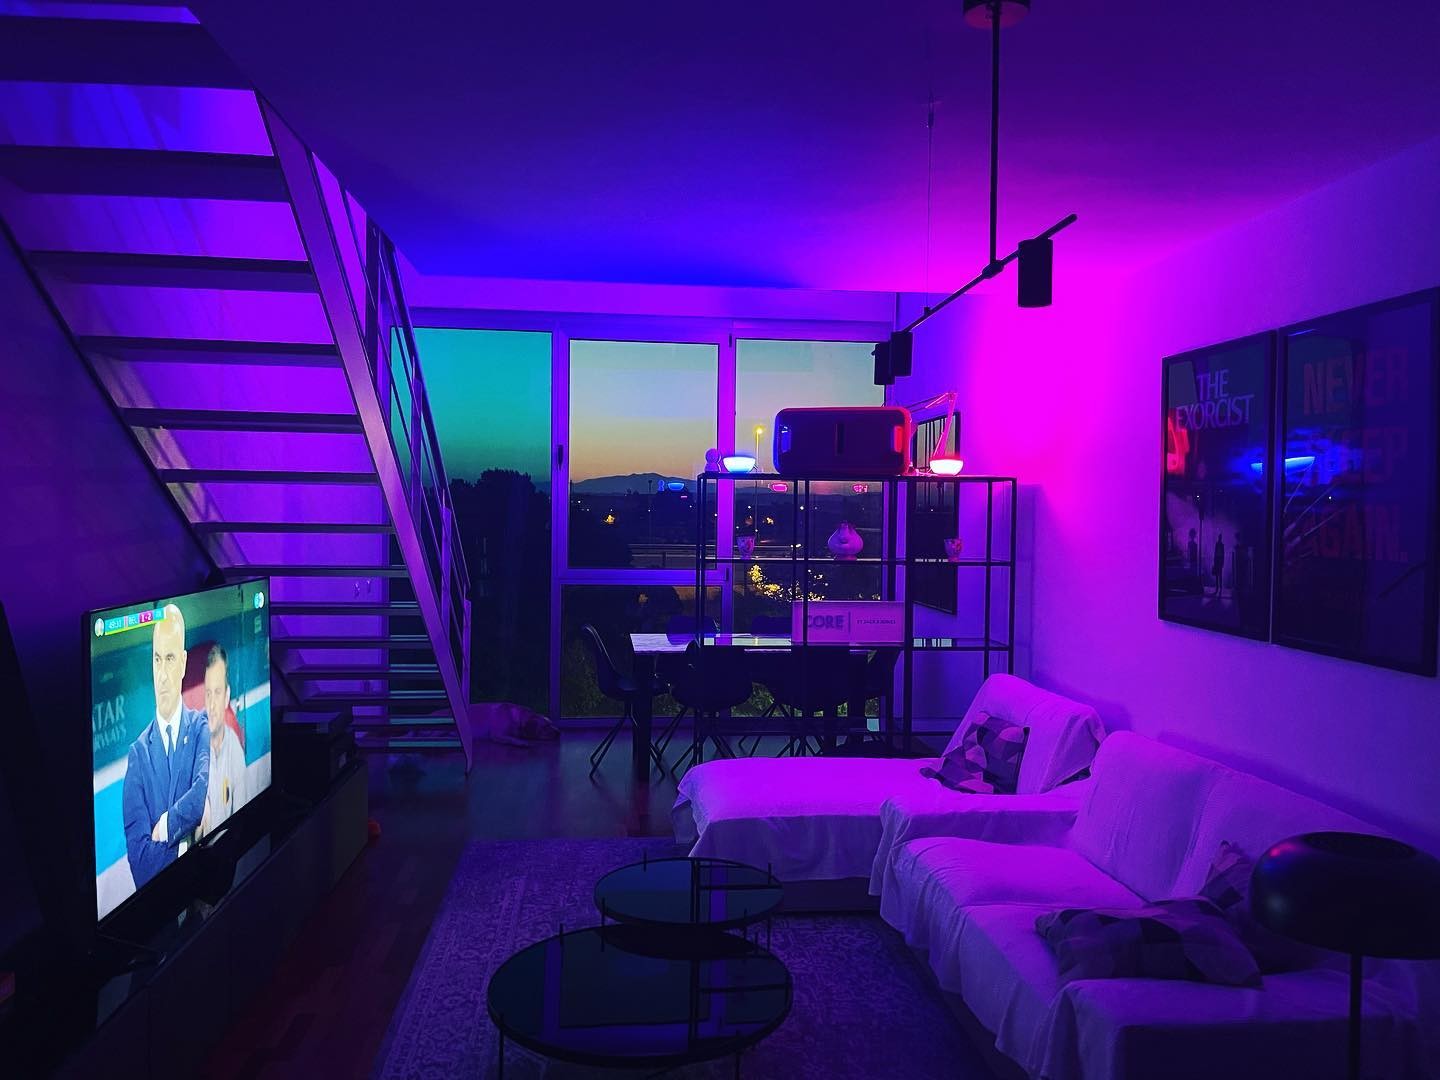 Anbefalede Ungdom Odds Philips Hue on Twitter: "Pink, purple, and blue – and a gorgeous sunset  view. What colors do you like to combine? This photo was submitted by a  real Hue user. Add #philipshue